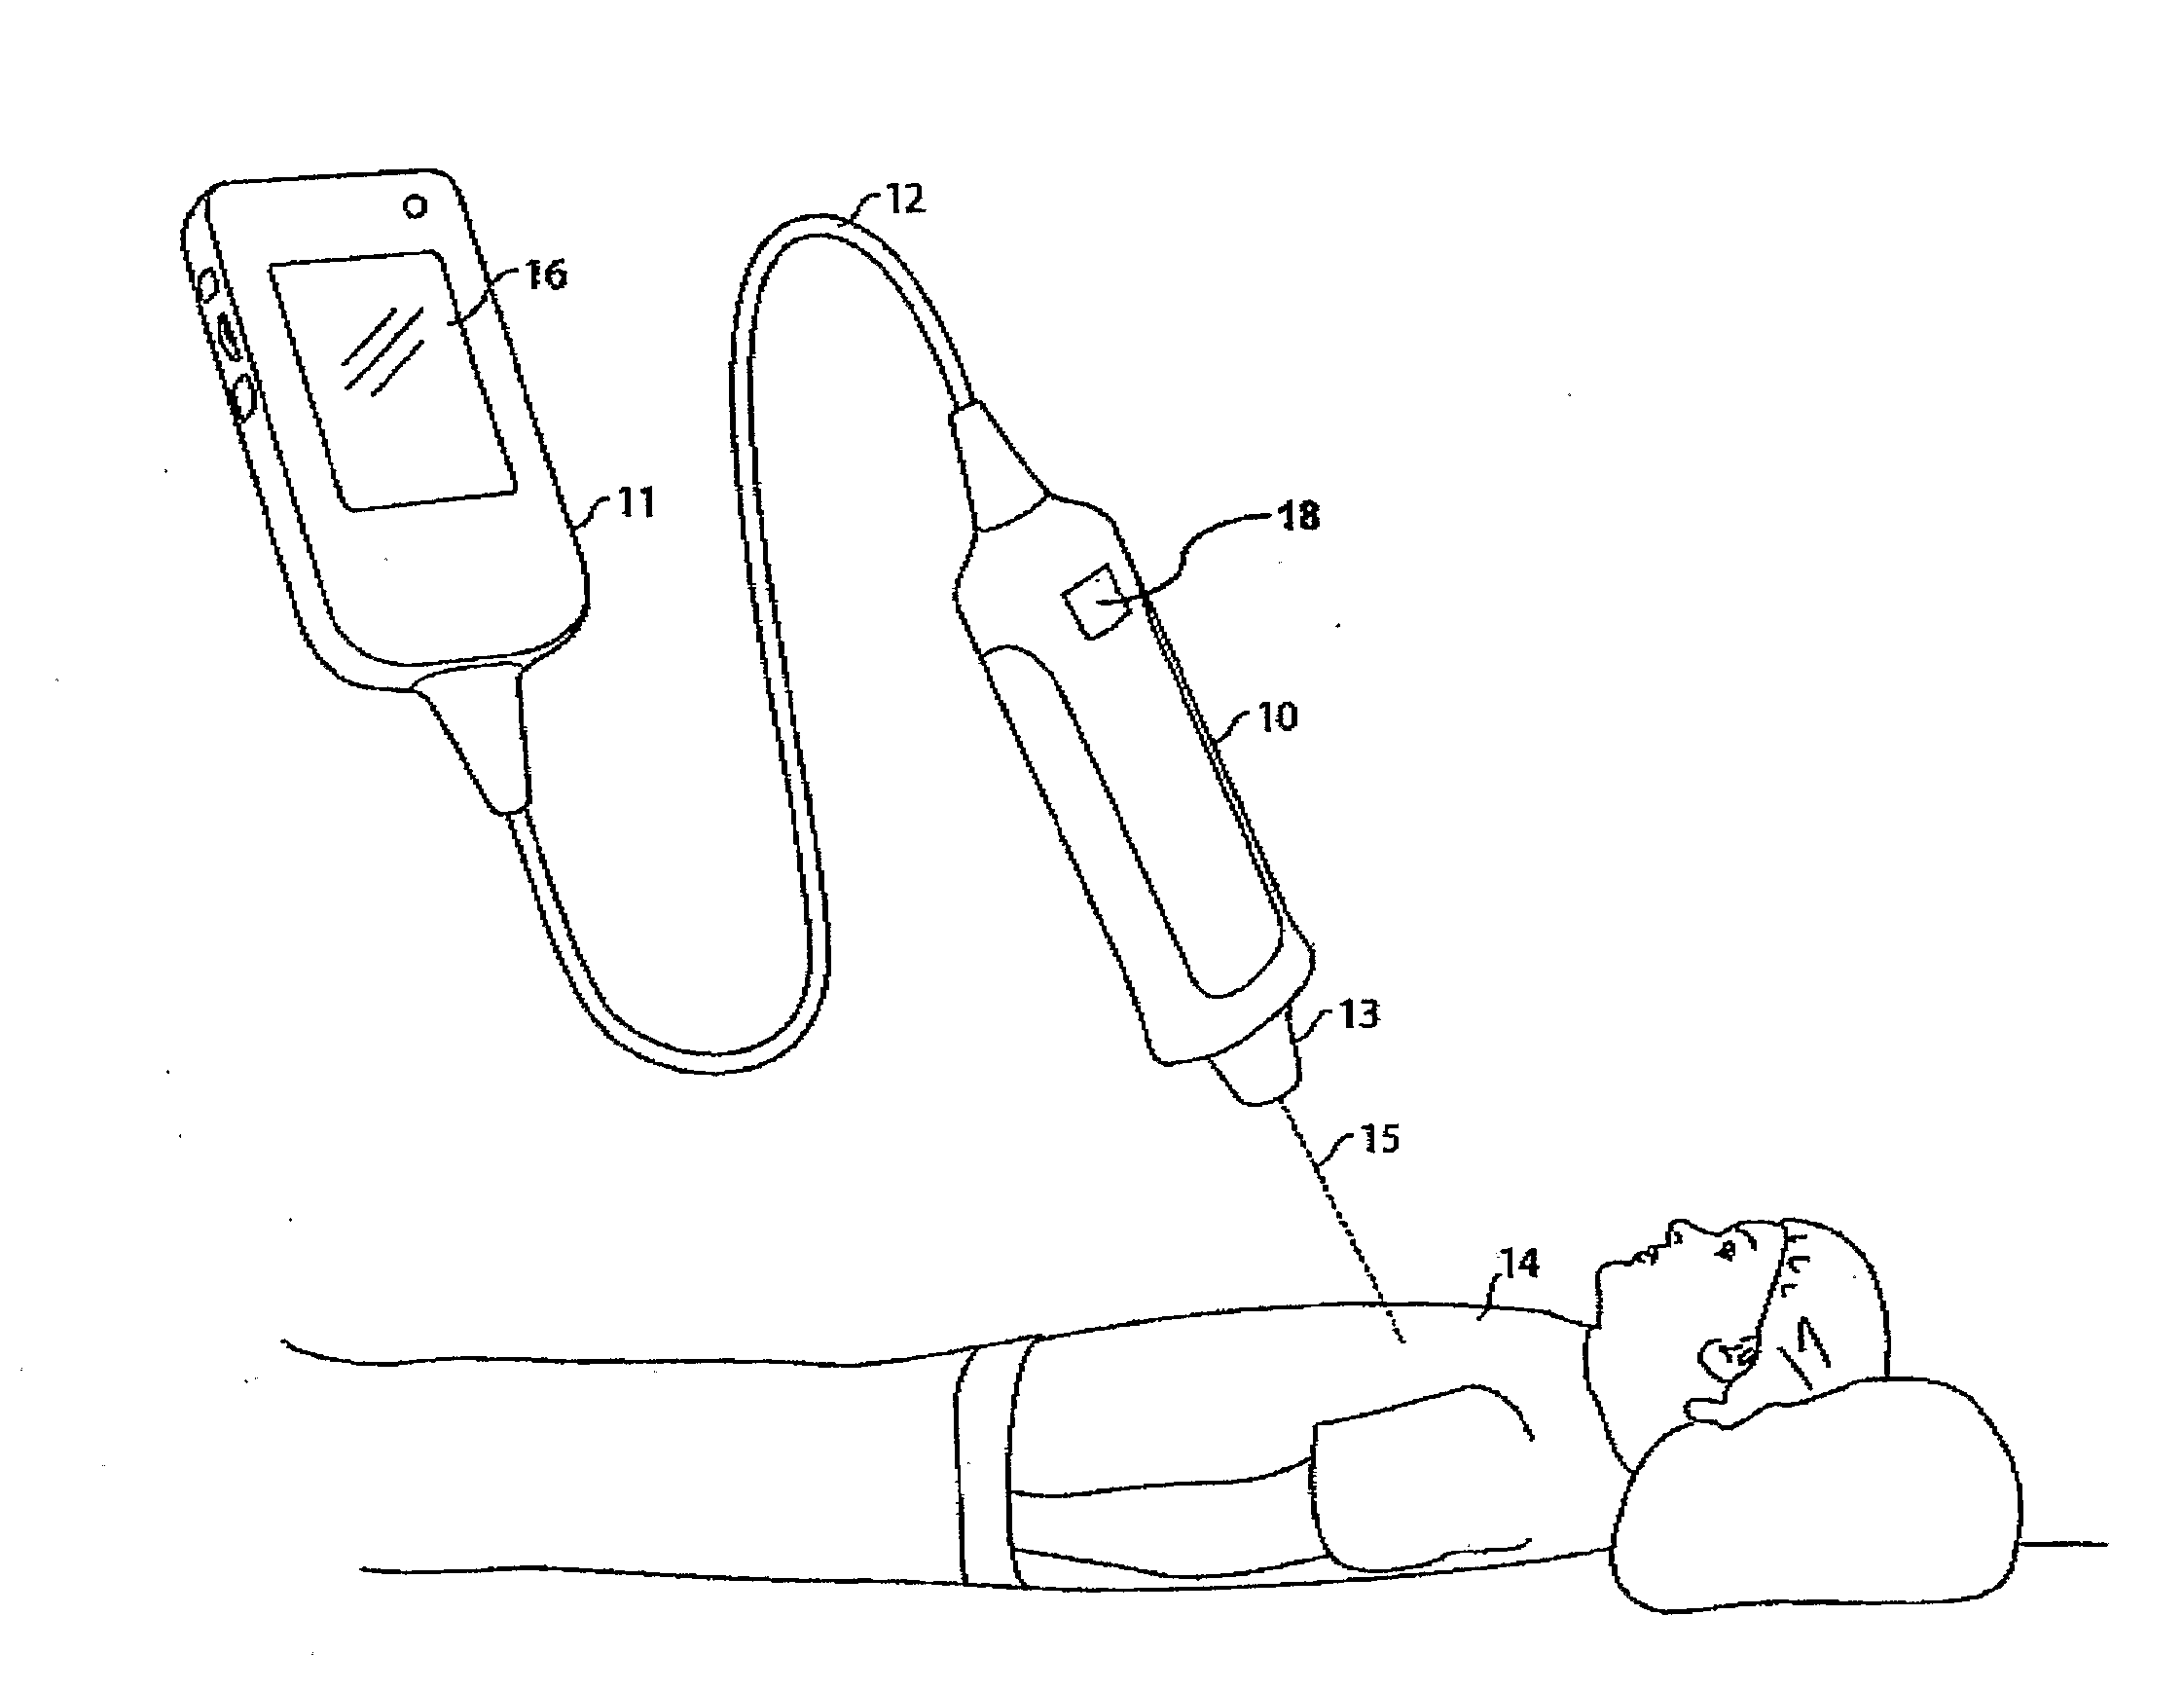 Medical scanning apparatus and method